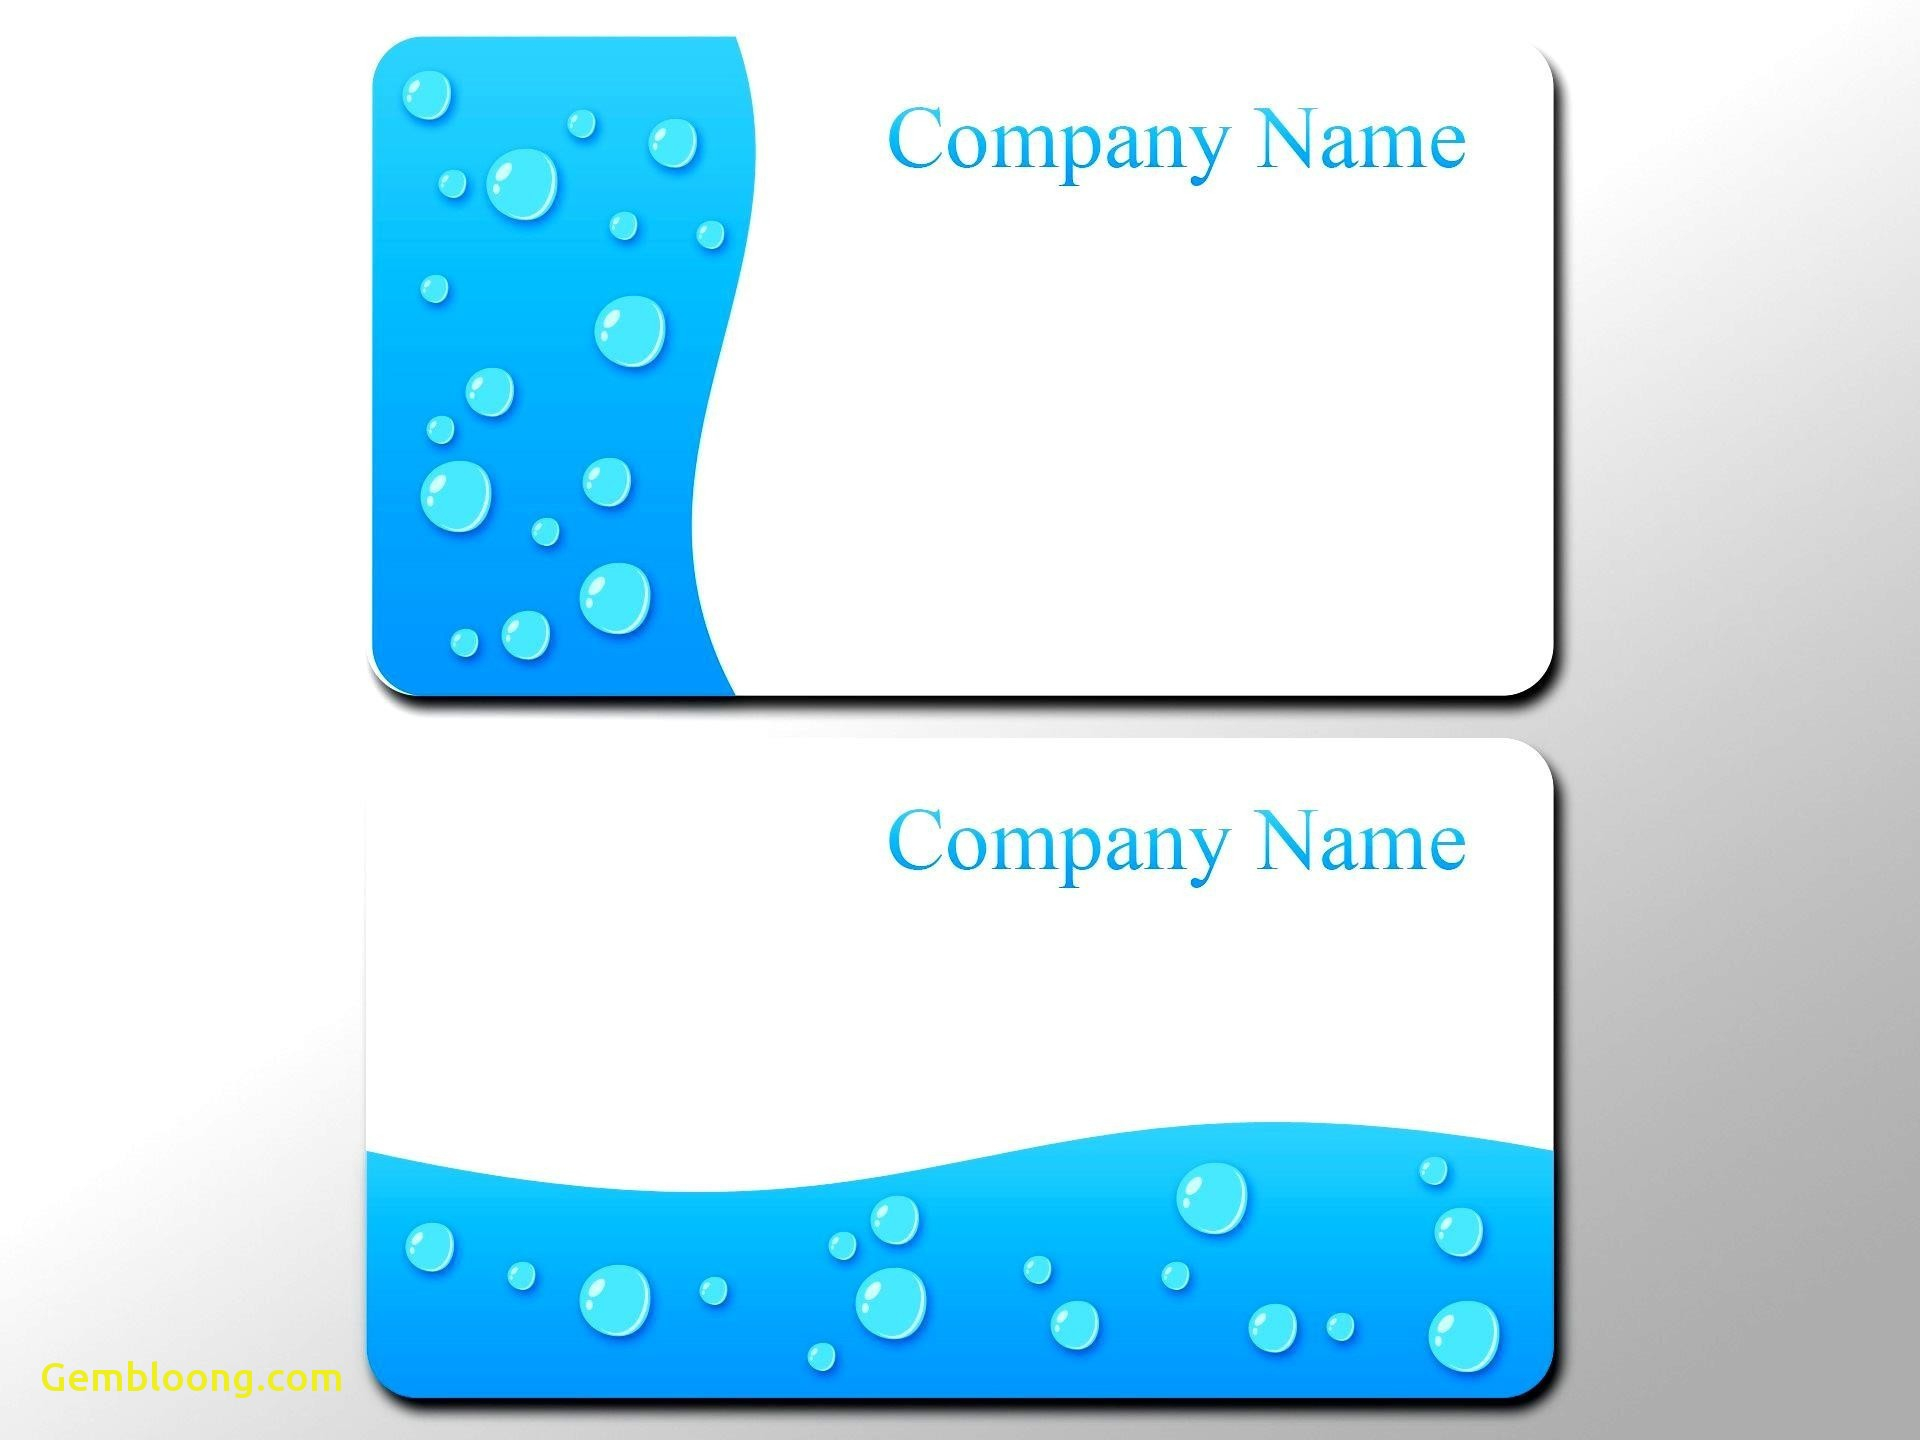 Business Card Photoshop Template Psd Awesome 016 Business For Plain Business Card Template